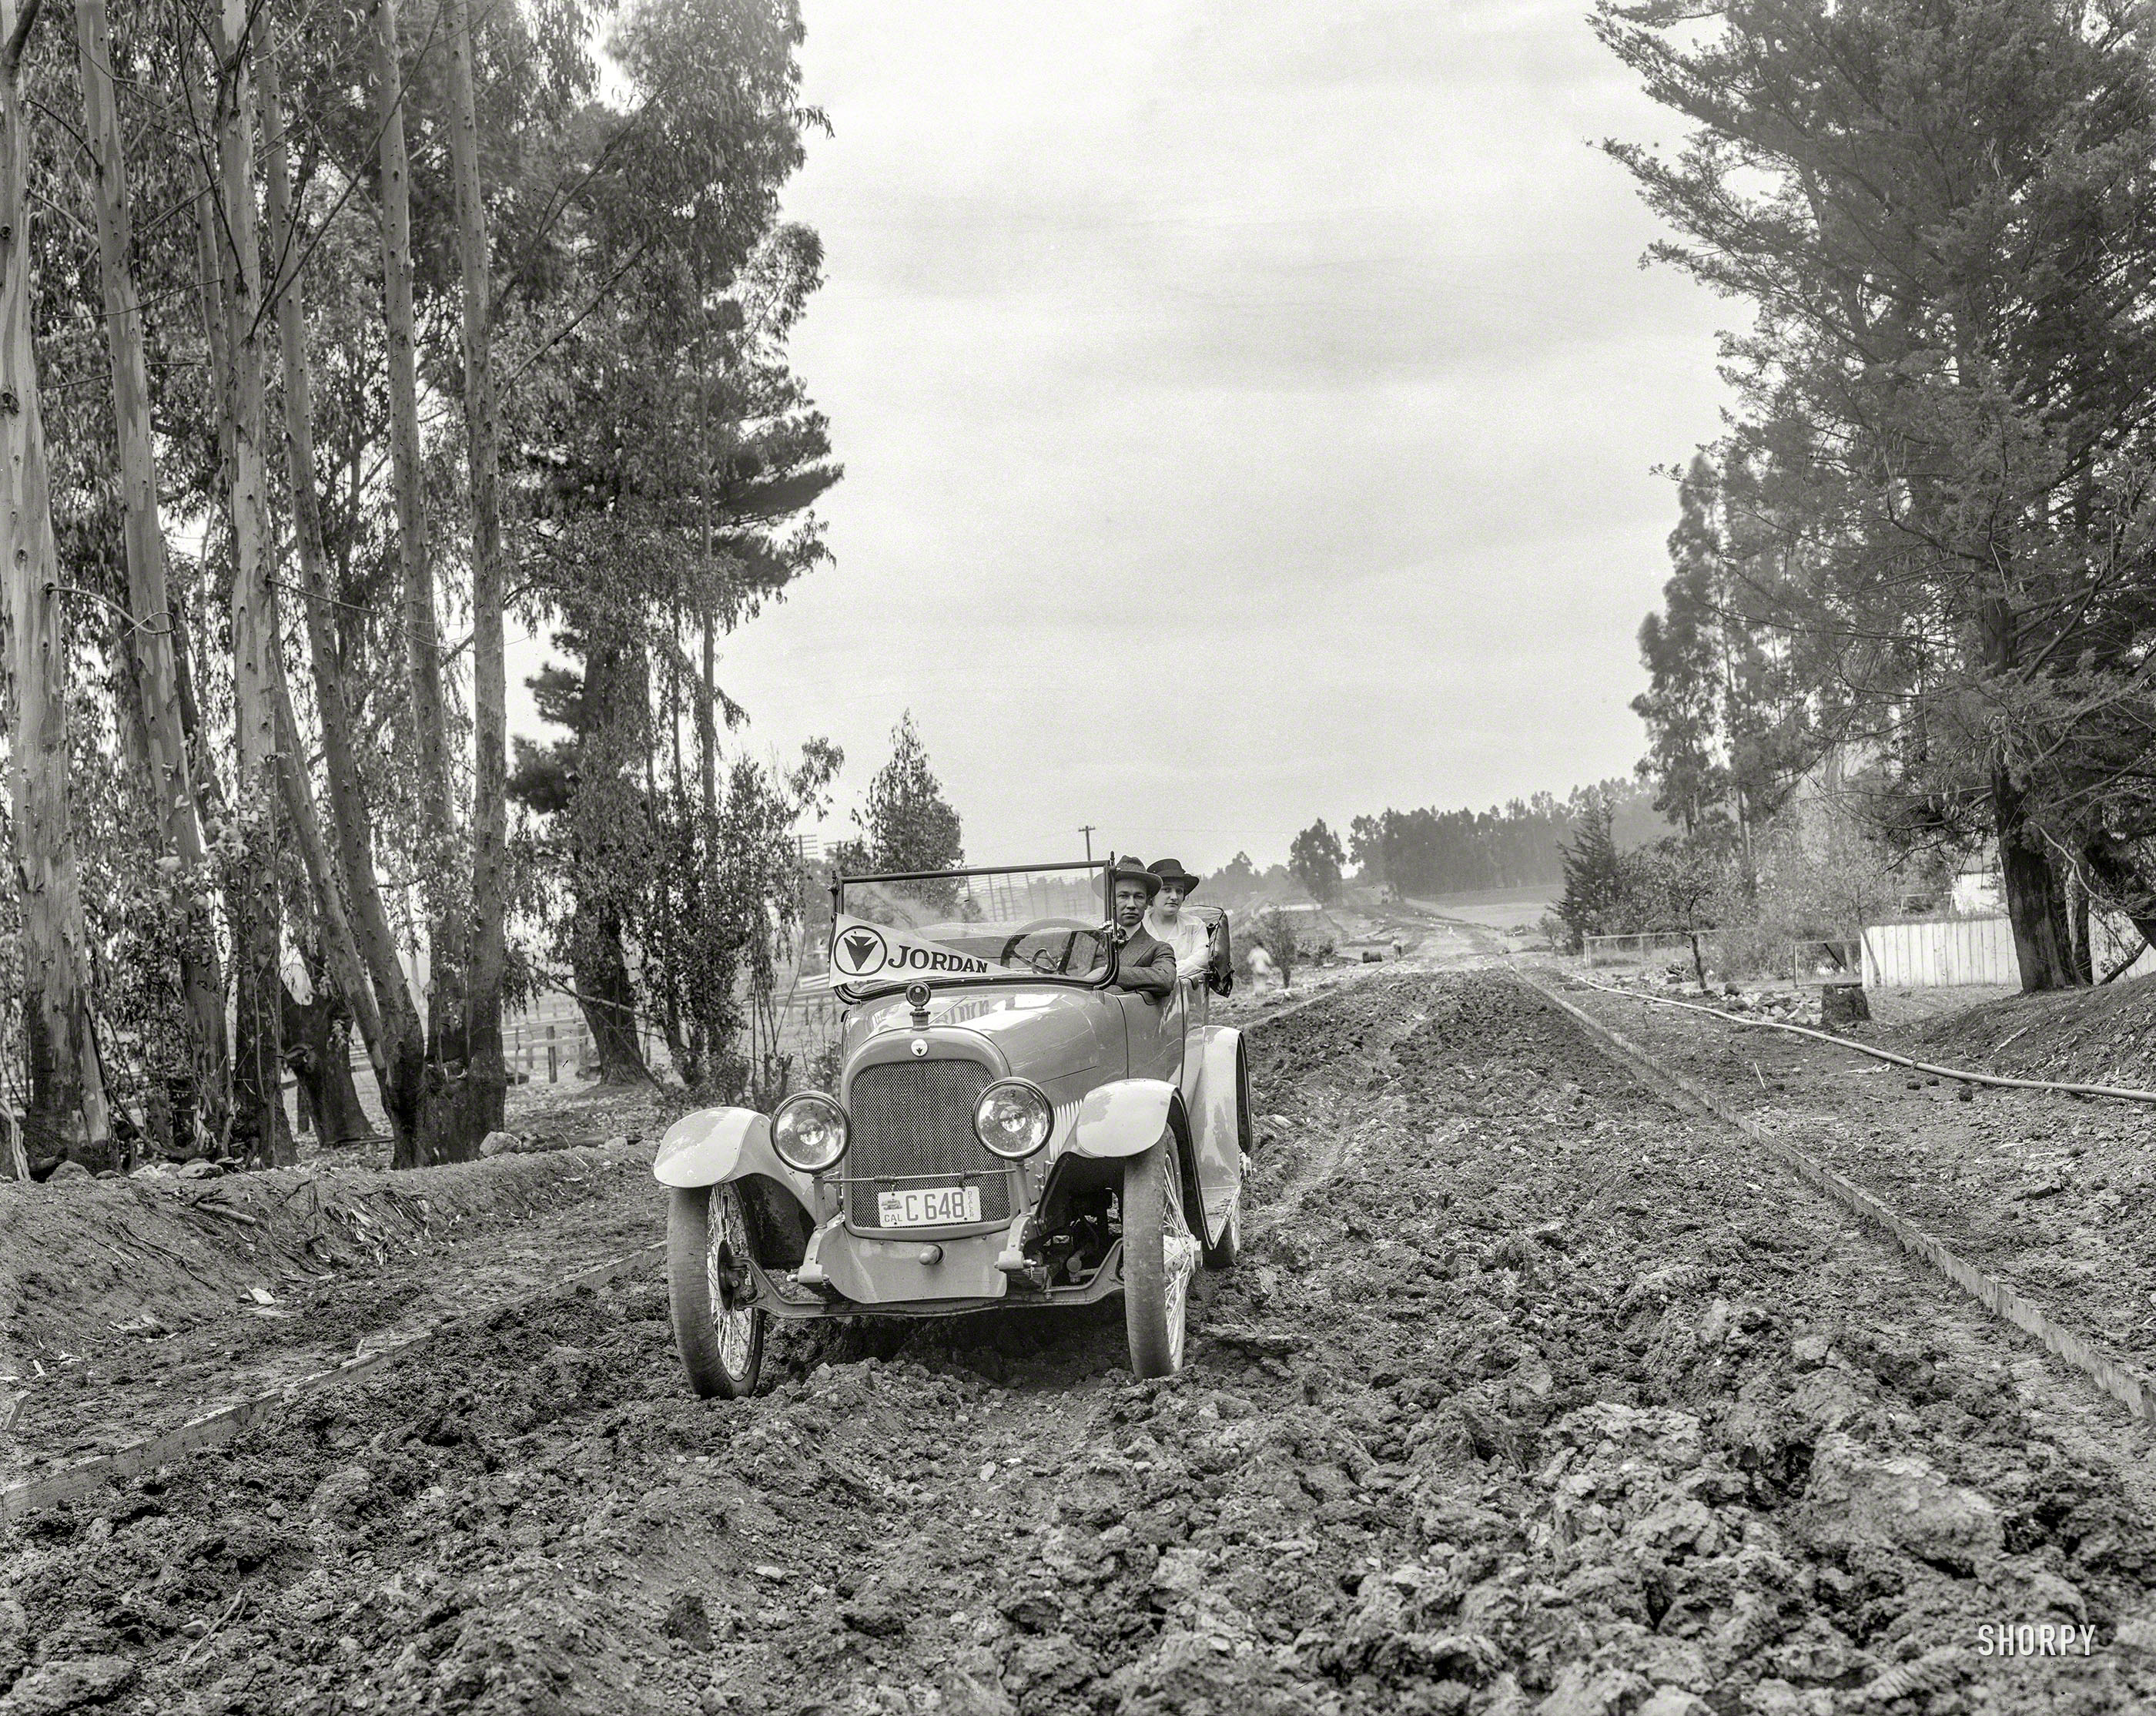 The Bay Area circa 1917. "Jordan touring car." Our second look at this intrepid couple, motoring along a freshly plowed highway in their "Seven-Passenger Luxury Car." From the Wyland Stanley collection of San Francisciana. View full size.
